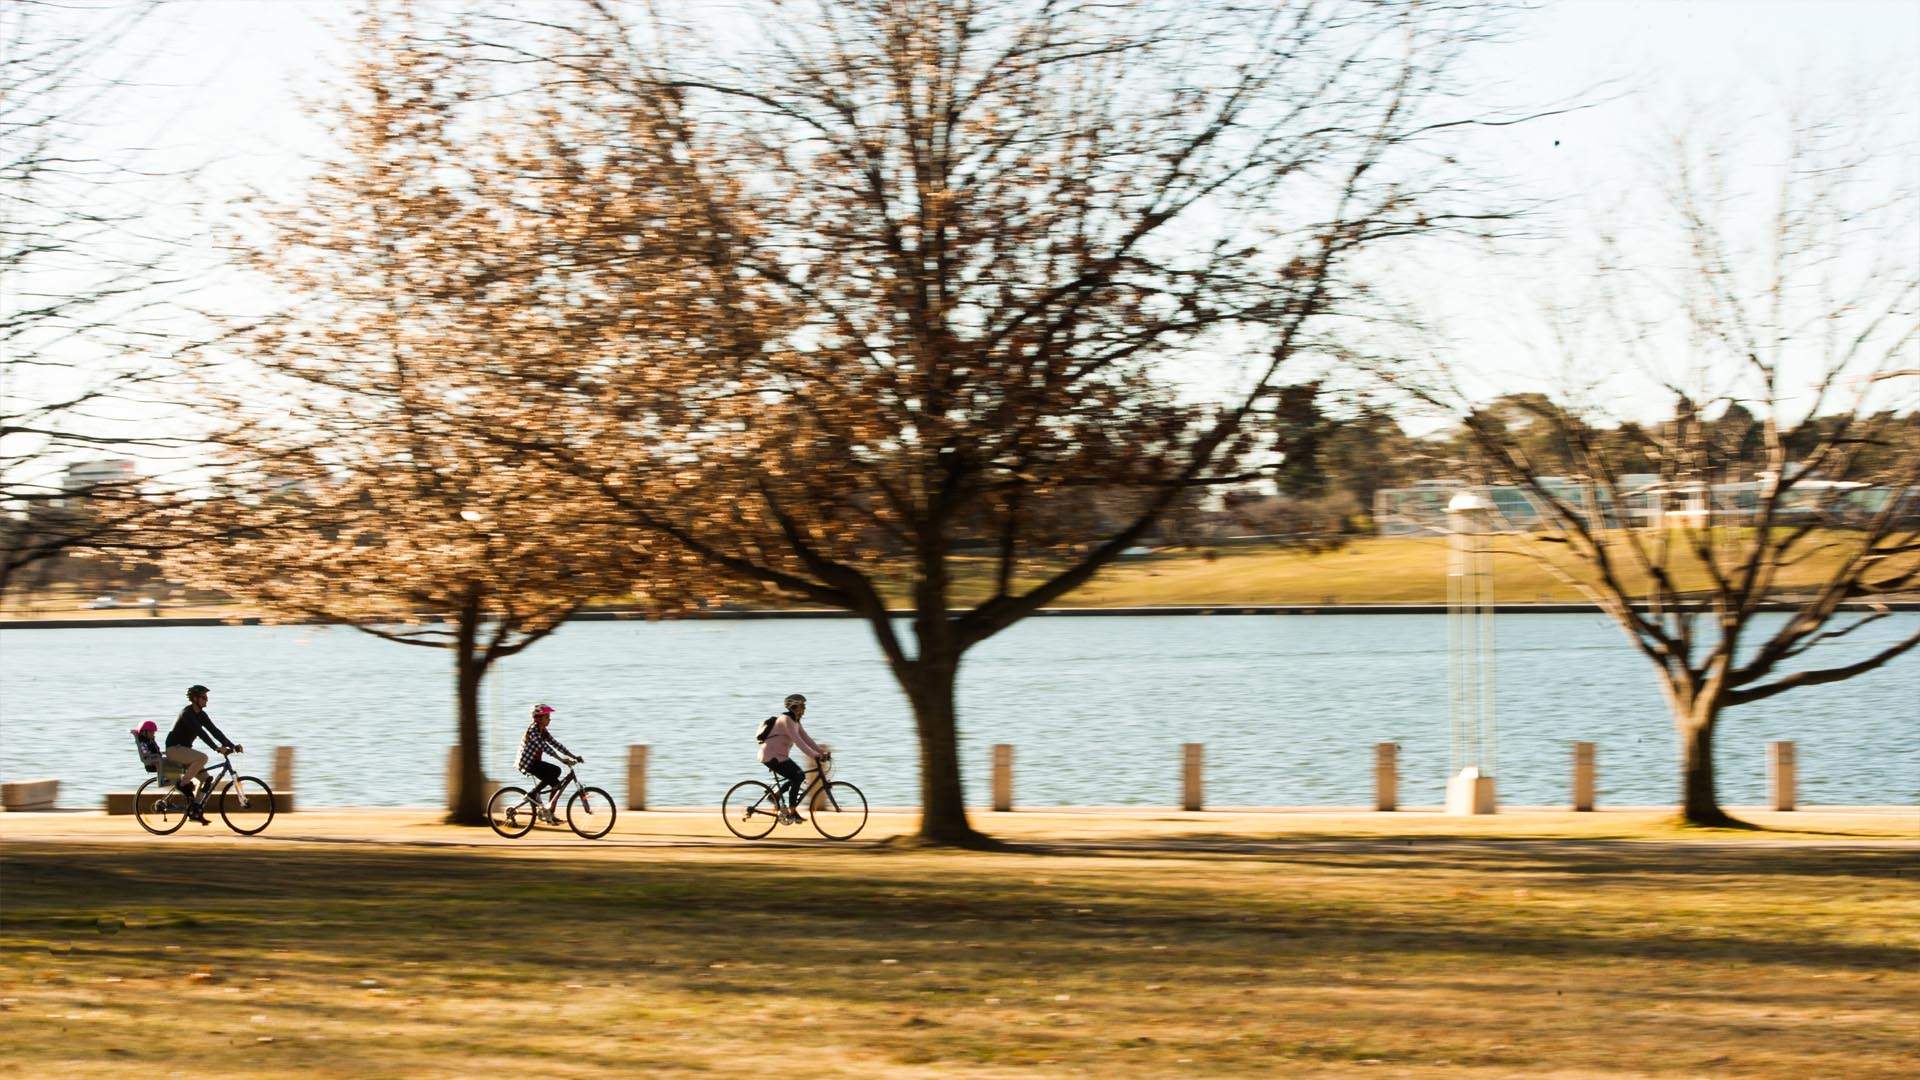 LAKE BURLEY GRIFFIN